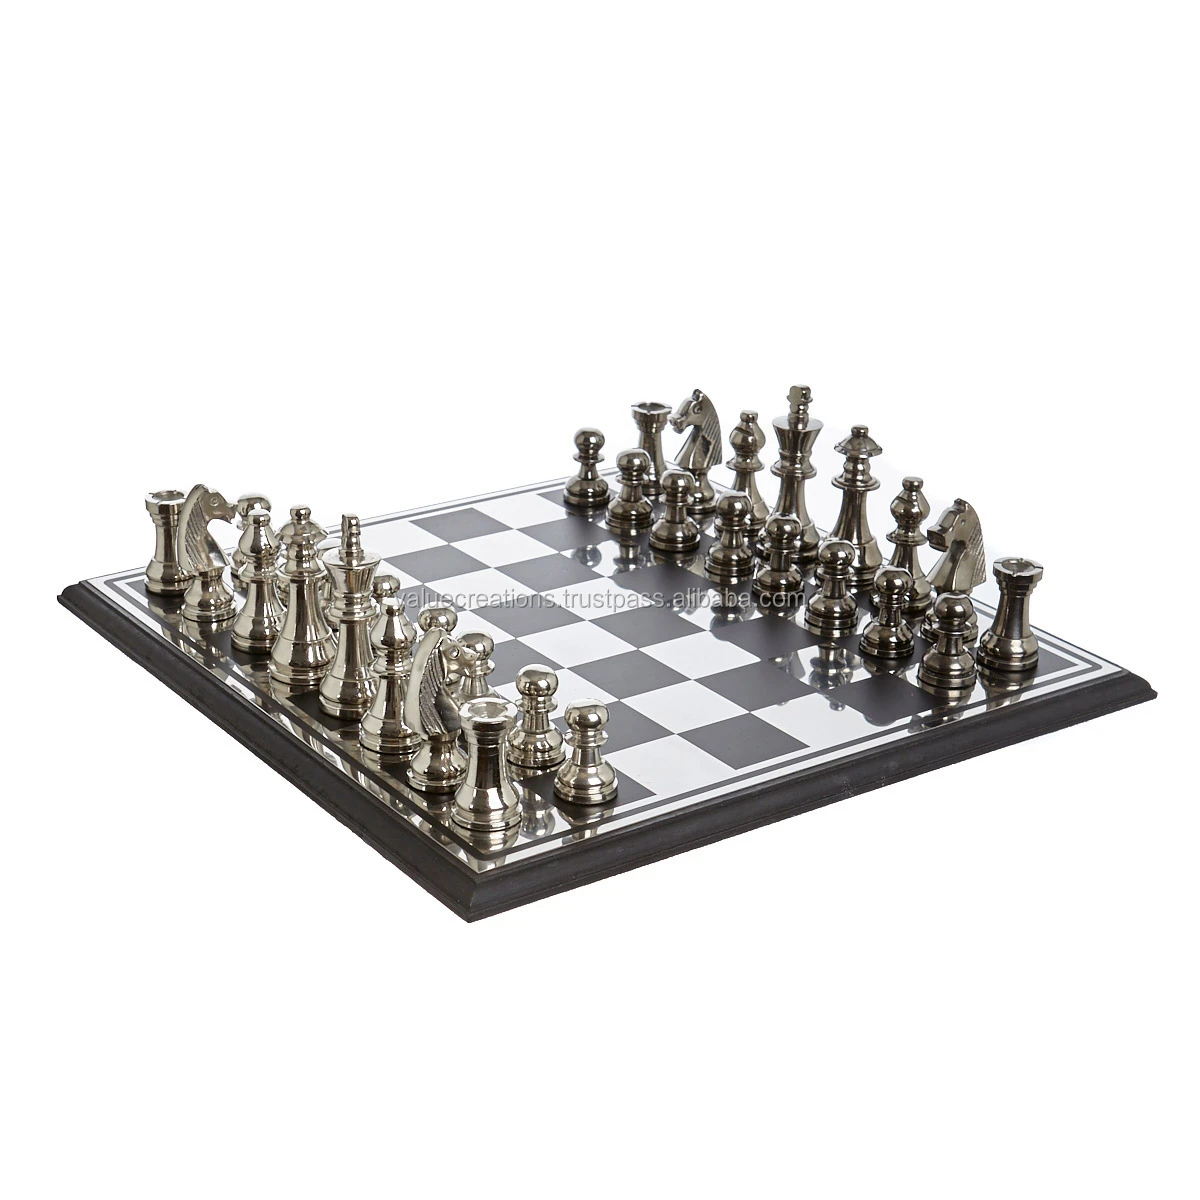 Indoor Games Chess set With  Metal Players Wooden Customised Chess Set With Metal Players large chess set